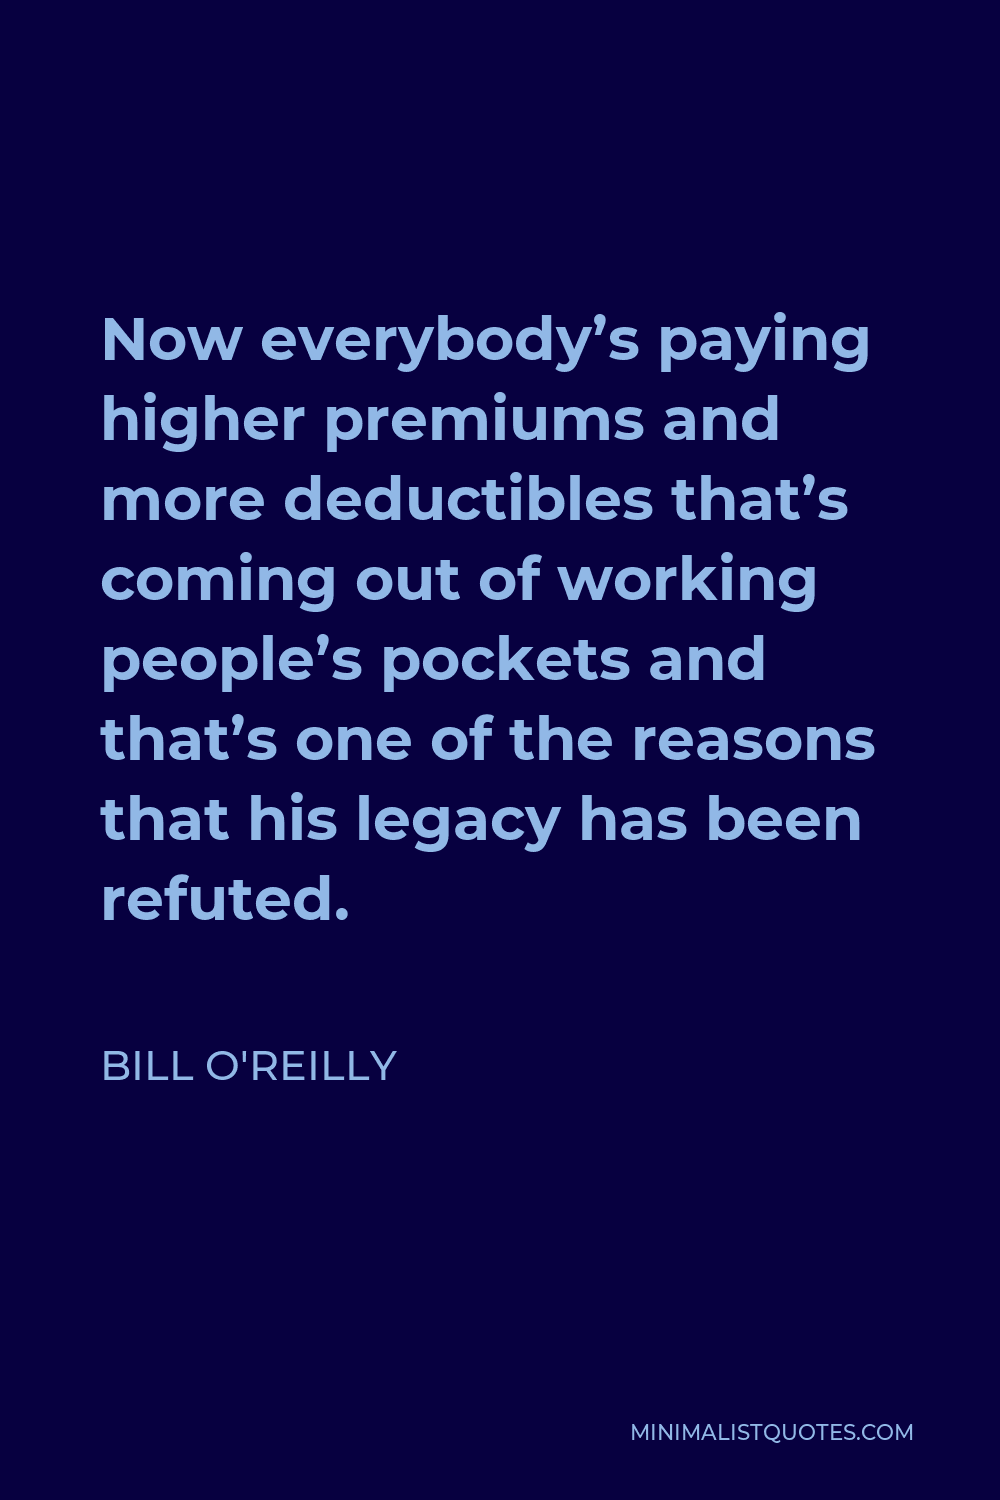 Bill O'Reilly Quote - Now everybody’s paying higher premiums and more deductibles that’s coming out of working people’s pockets and that’s one of the reasons that his legacy has been refuted.